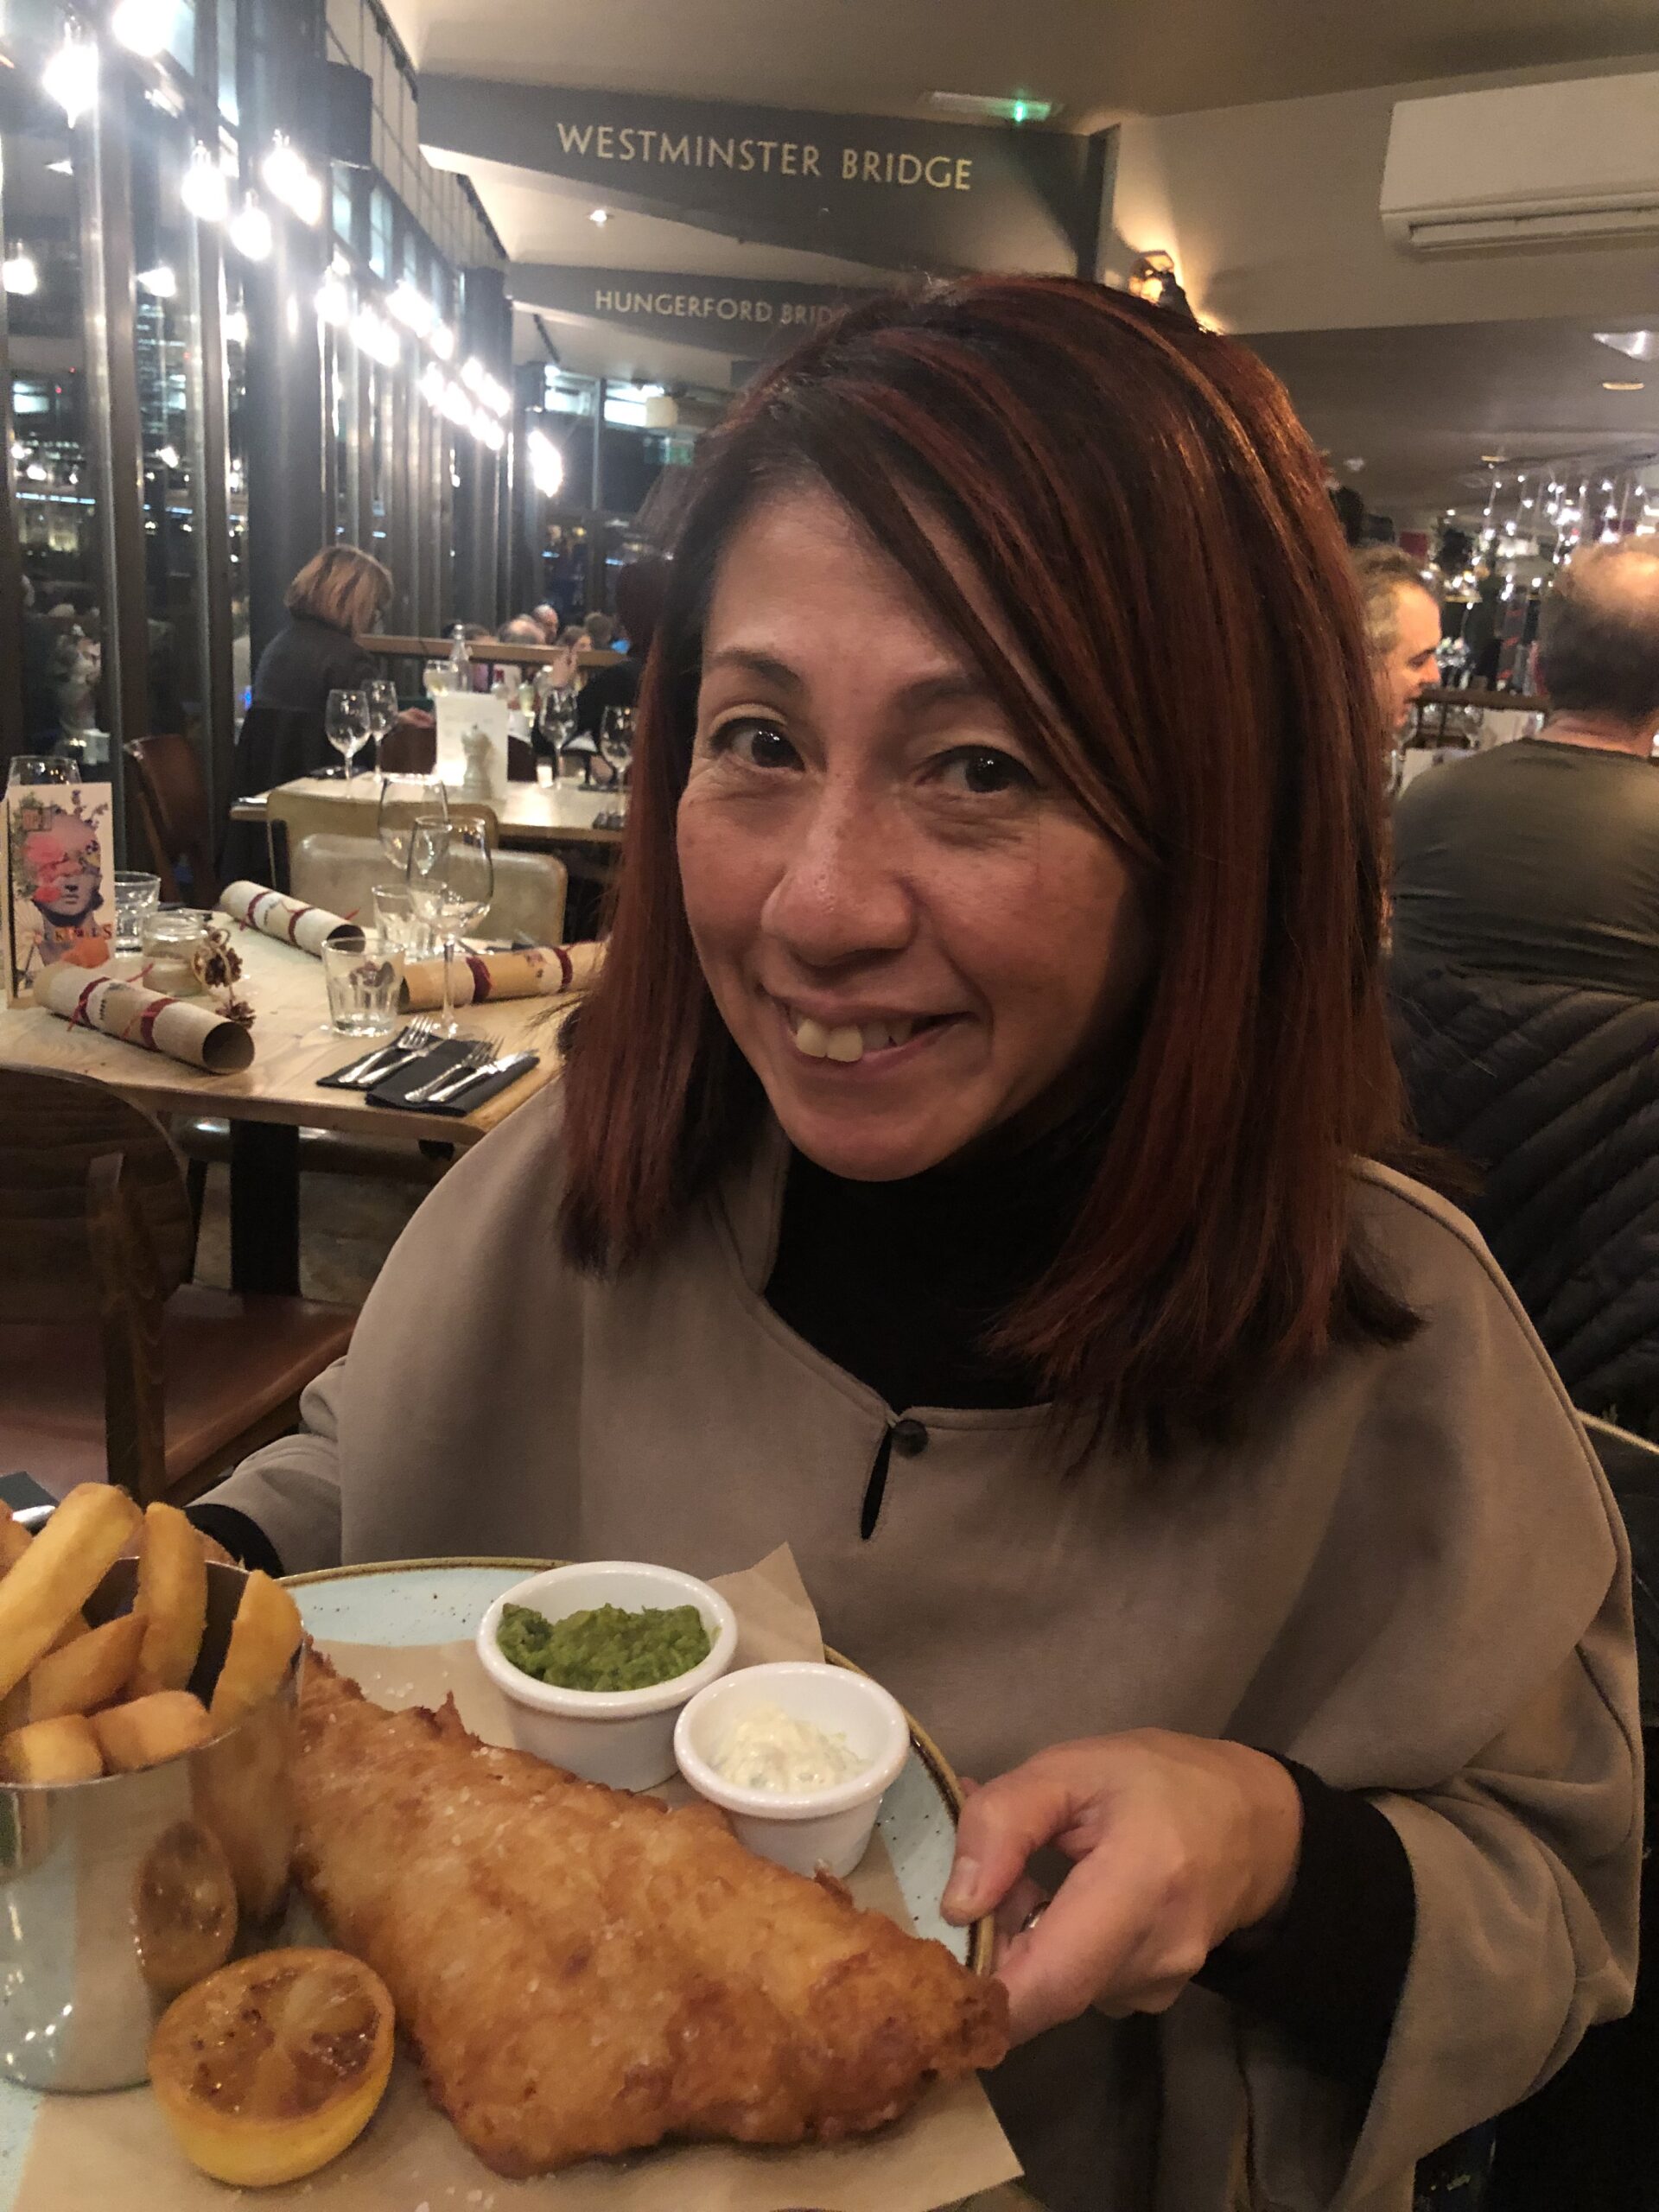 GIGS Fish and Chips restaurant, Fitzrovia, London W1T 4RE, 26 November 2020